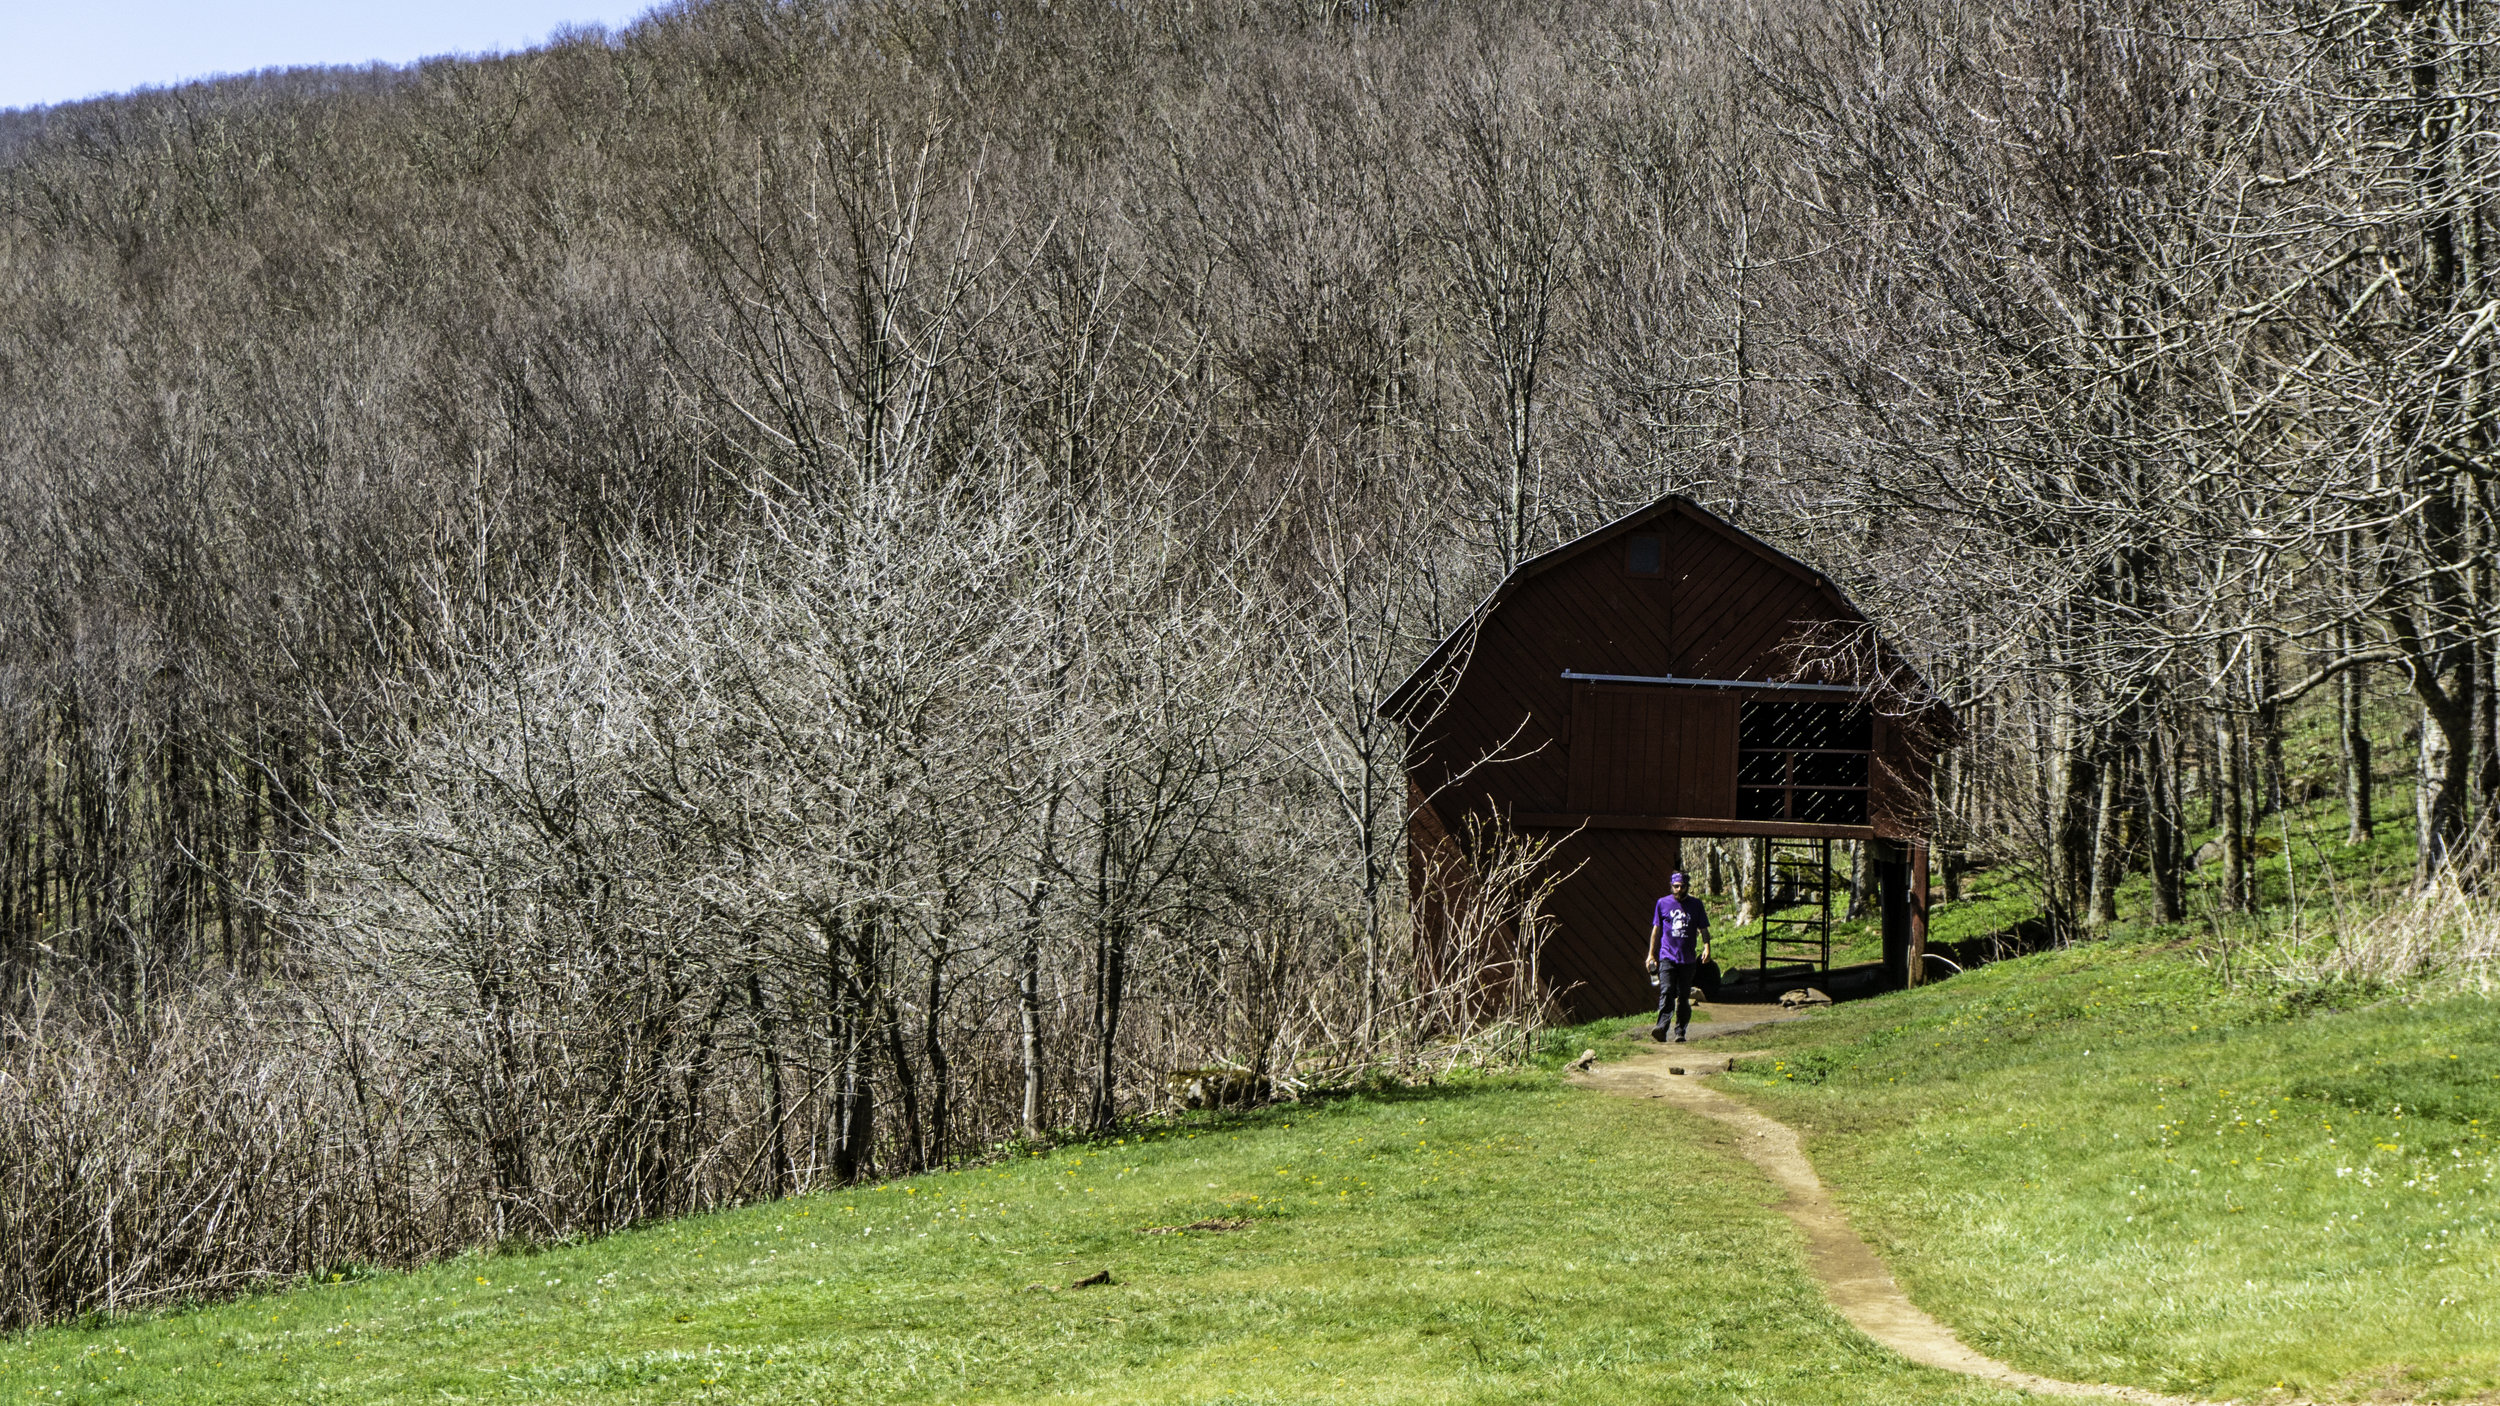  The famous Overmountain Shelter or “the Barn” 